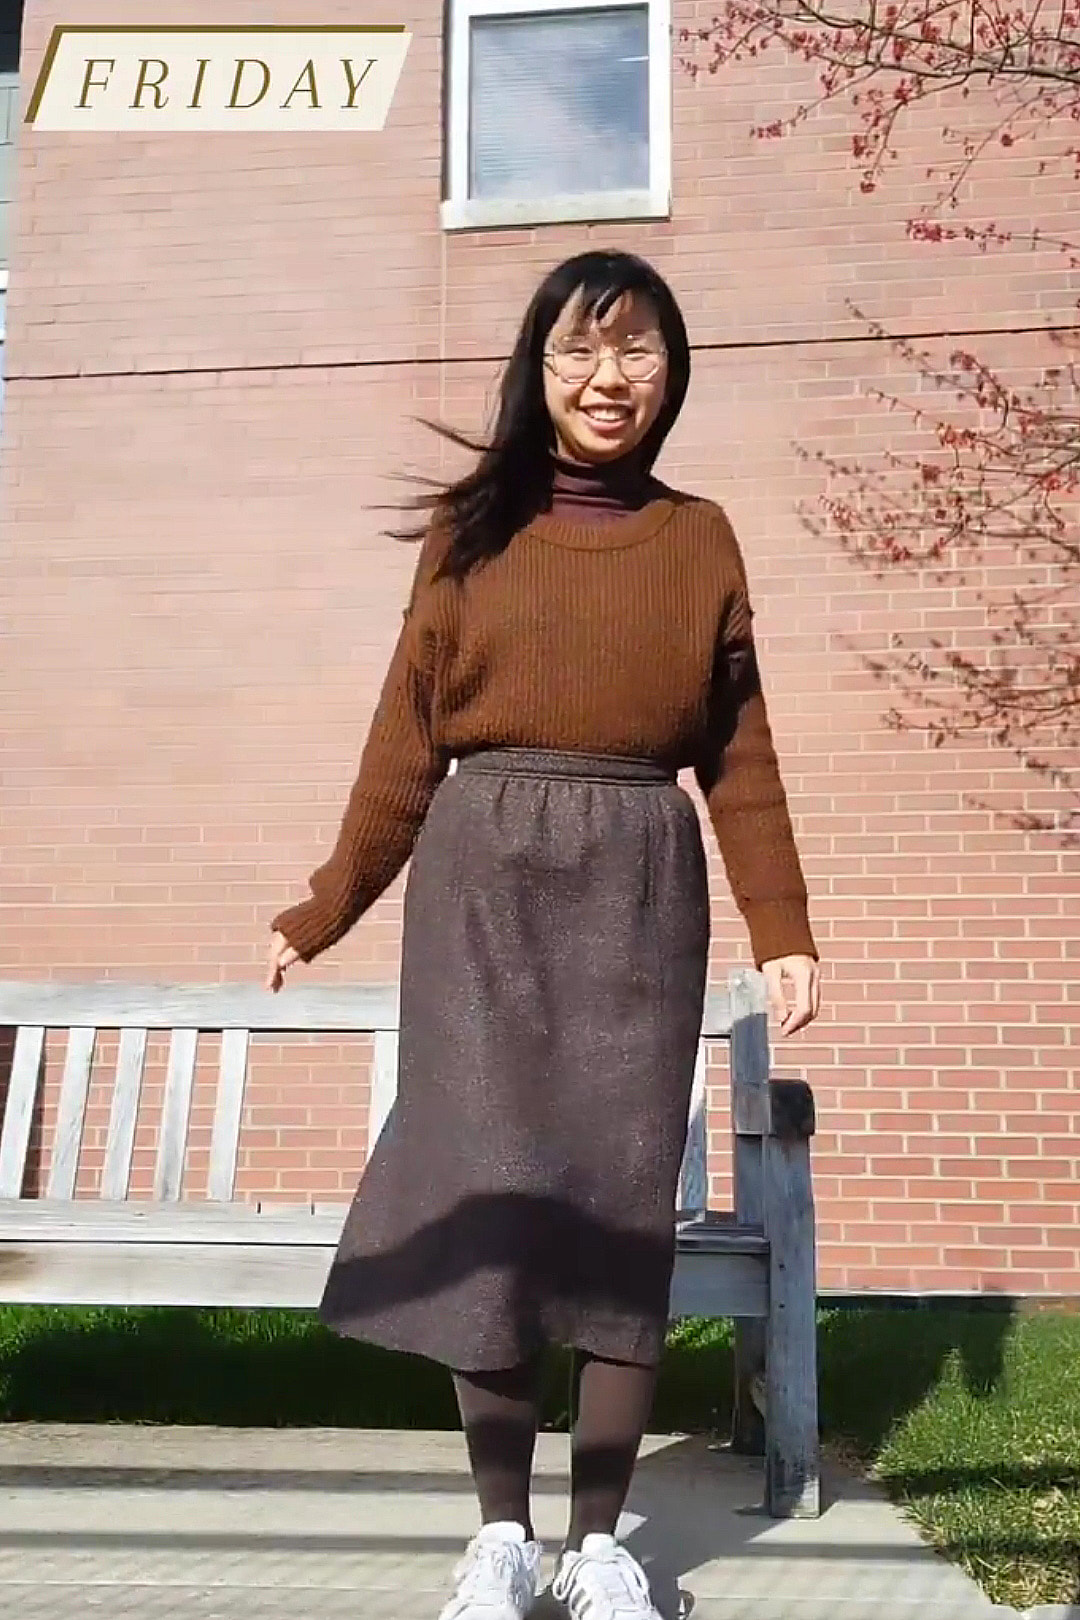 grainy screenshot of me wearing a brown turtleneck, brown sweater, brown A-line skirt, and brown tights standing in front of a brick building